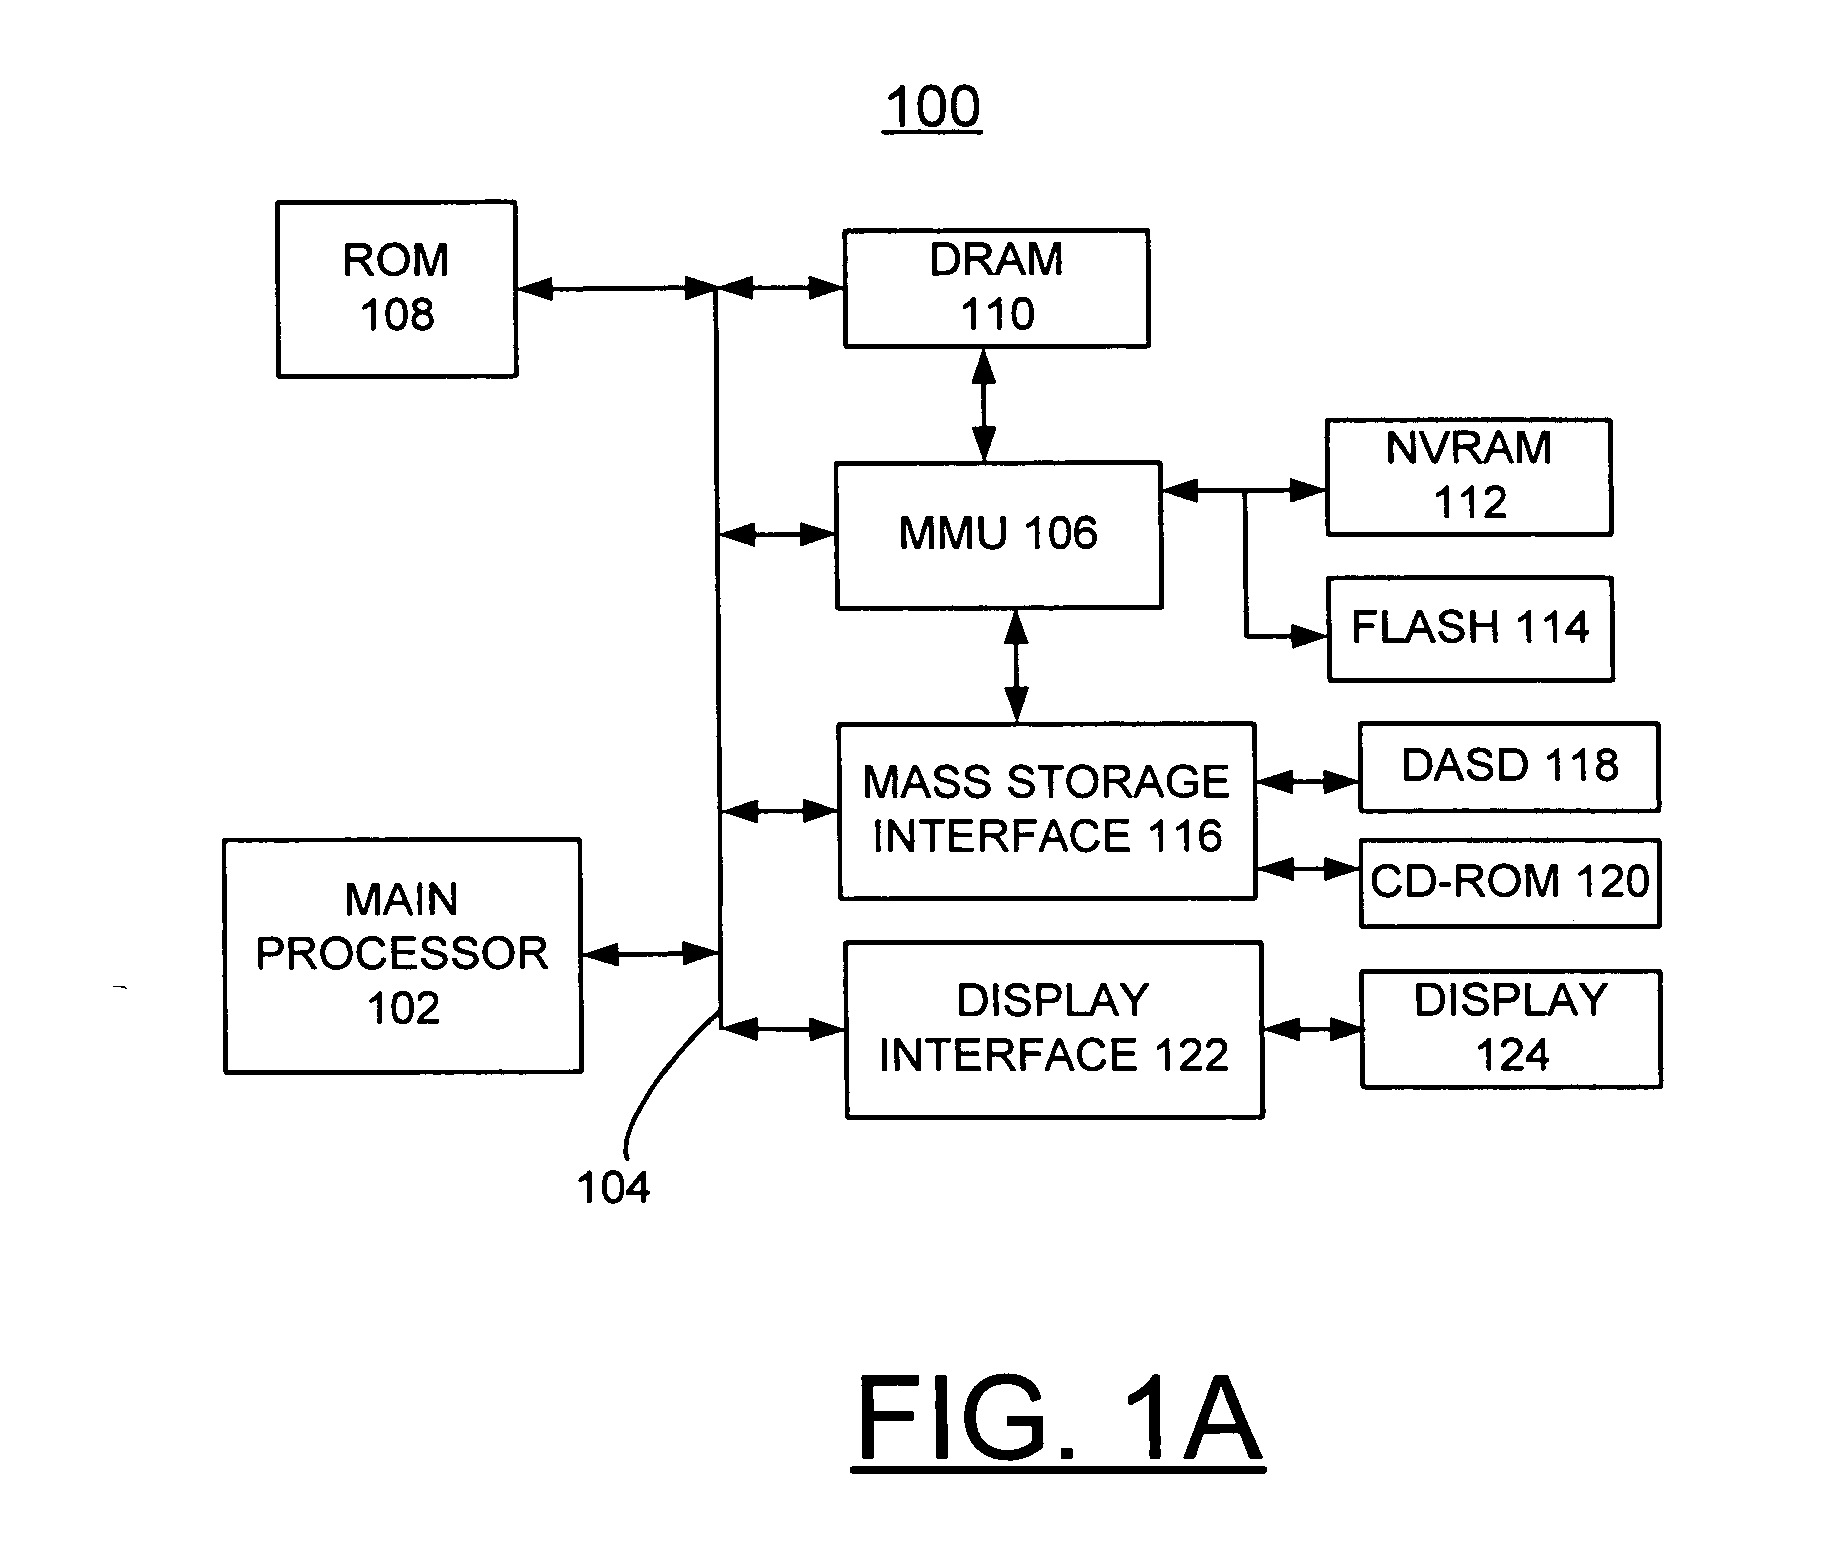 Method and apparatus for implementing persistence and refreshing of validation error messages based upon hierarchical refresh levels